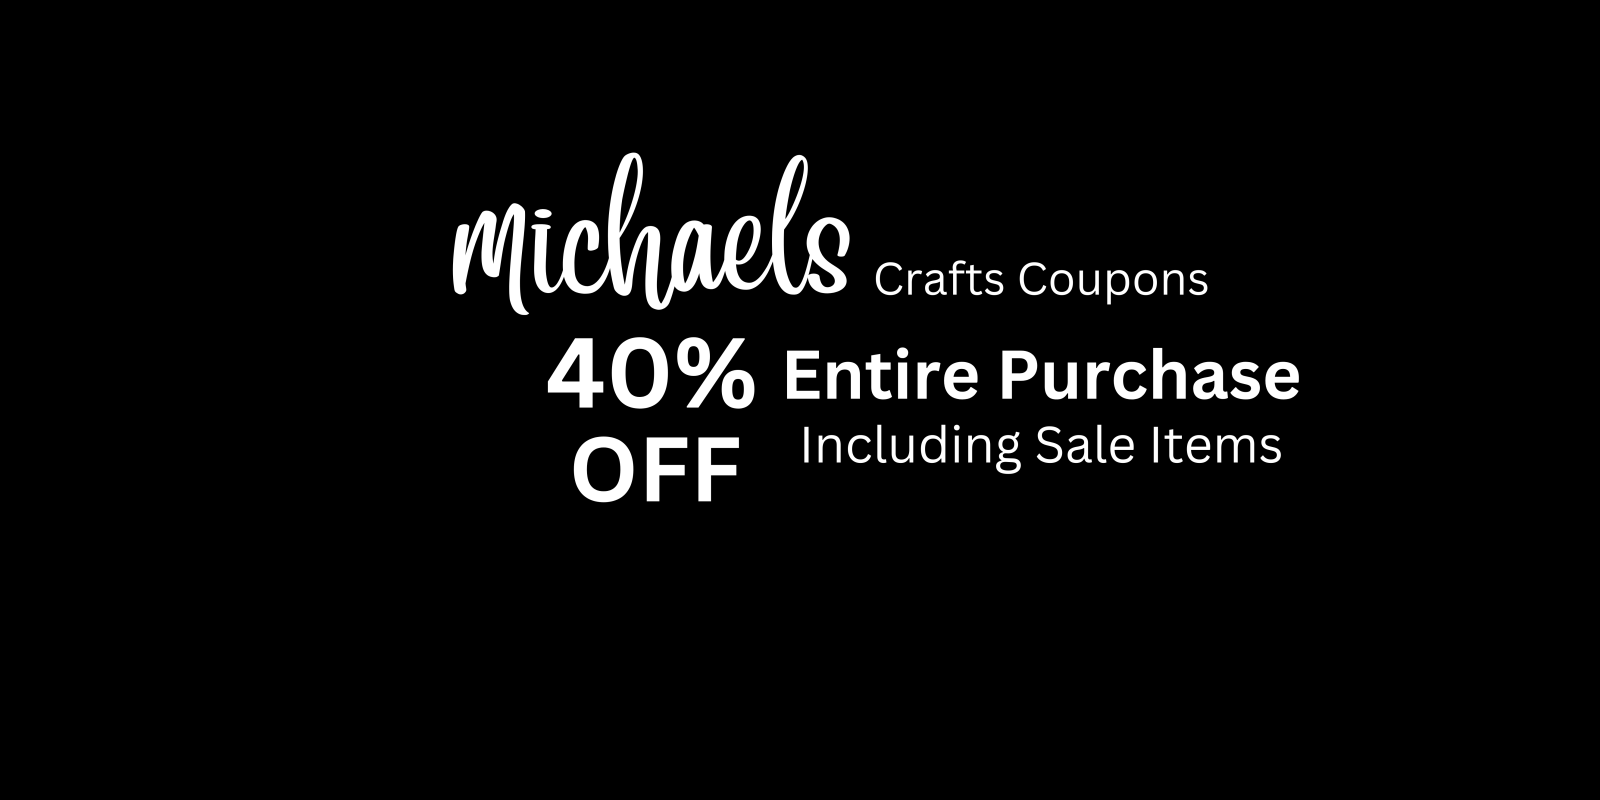 how-to-get-michaels-coupons-with-40-off